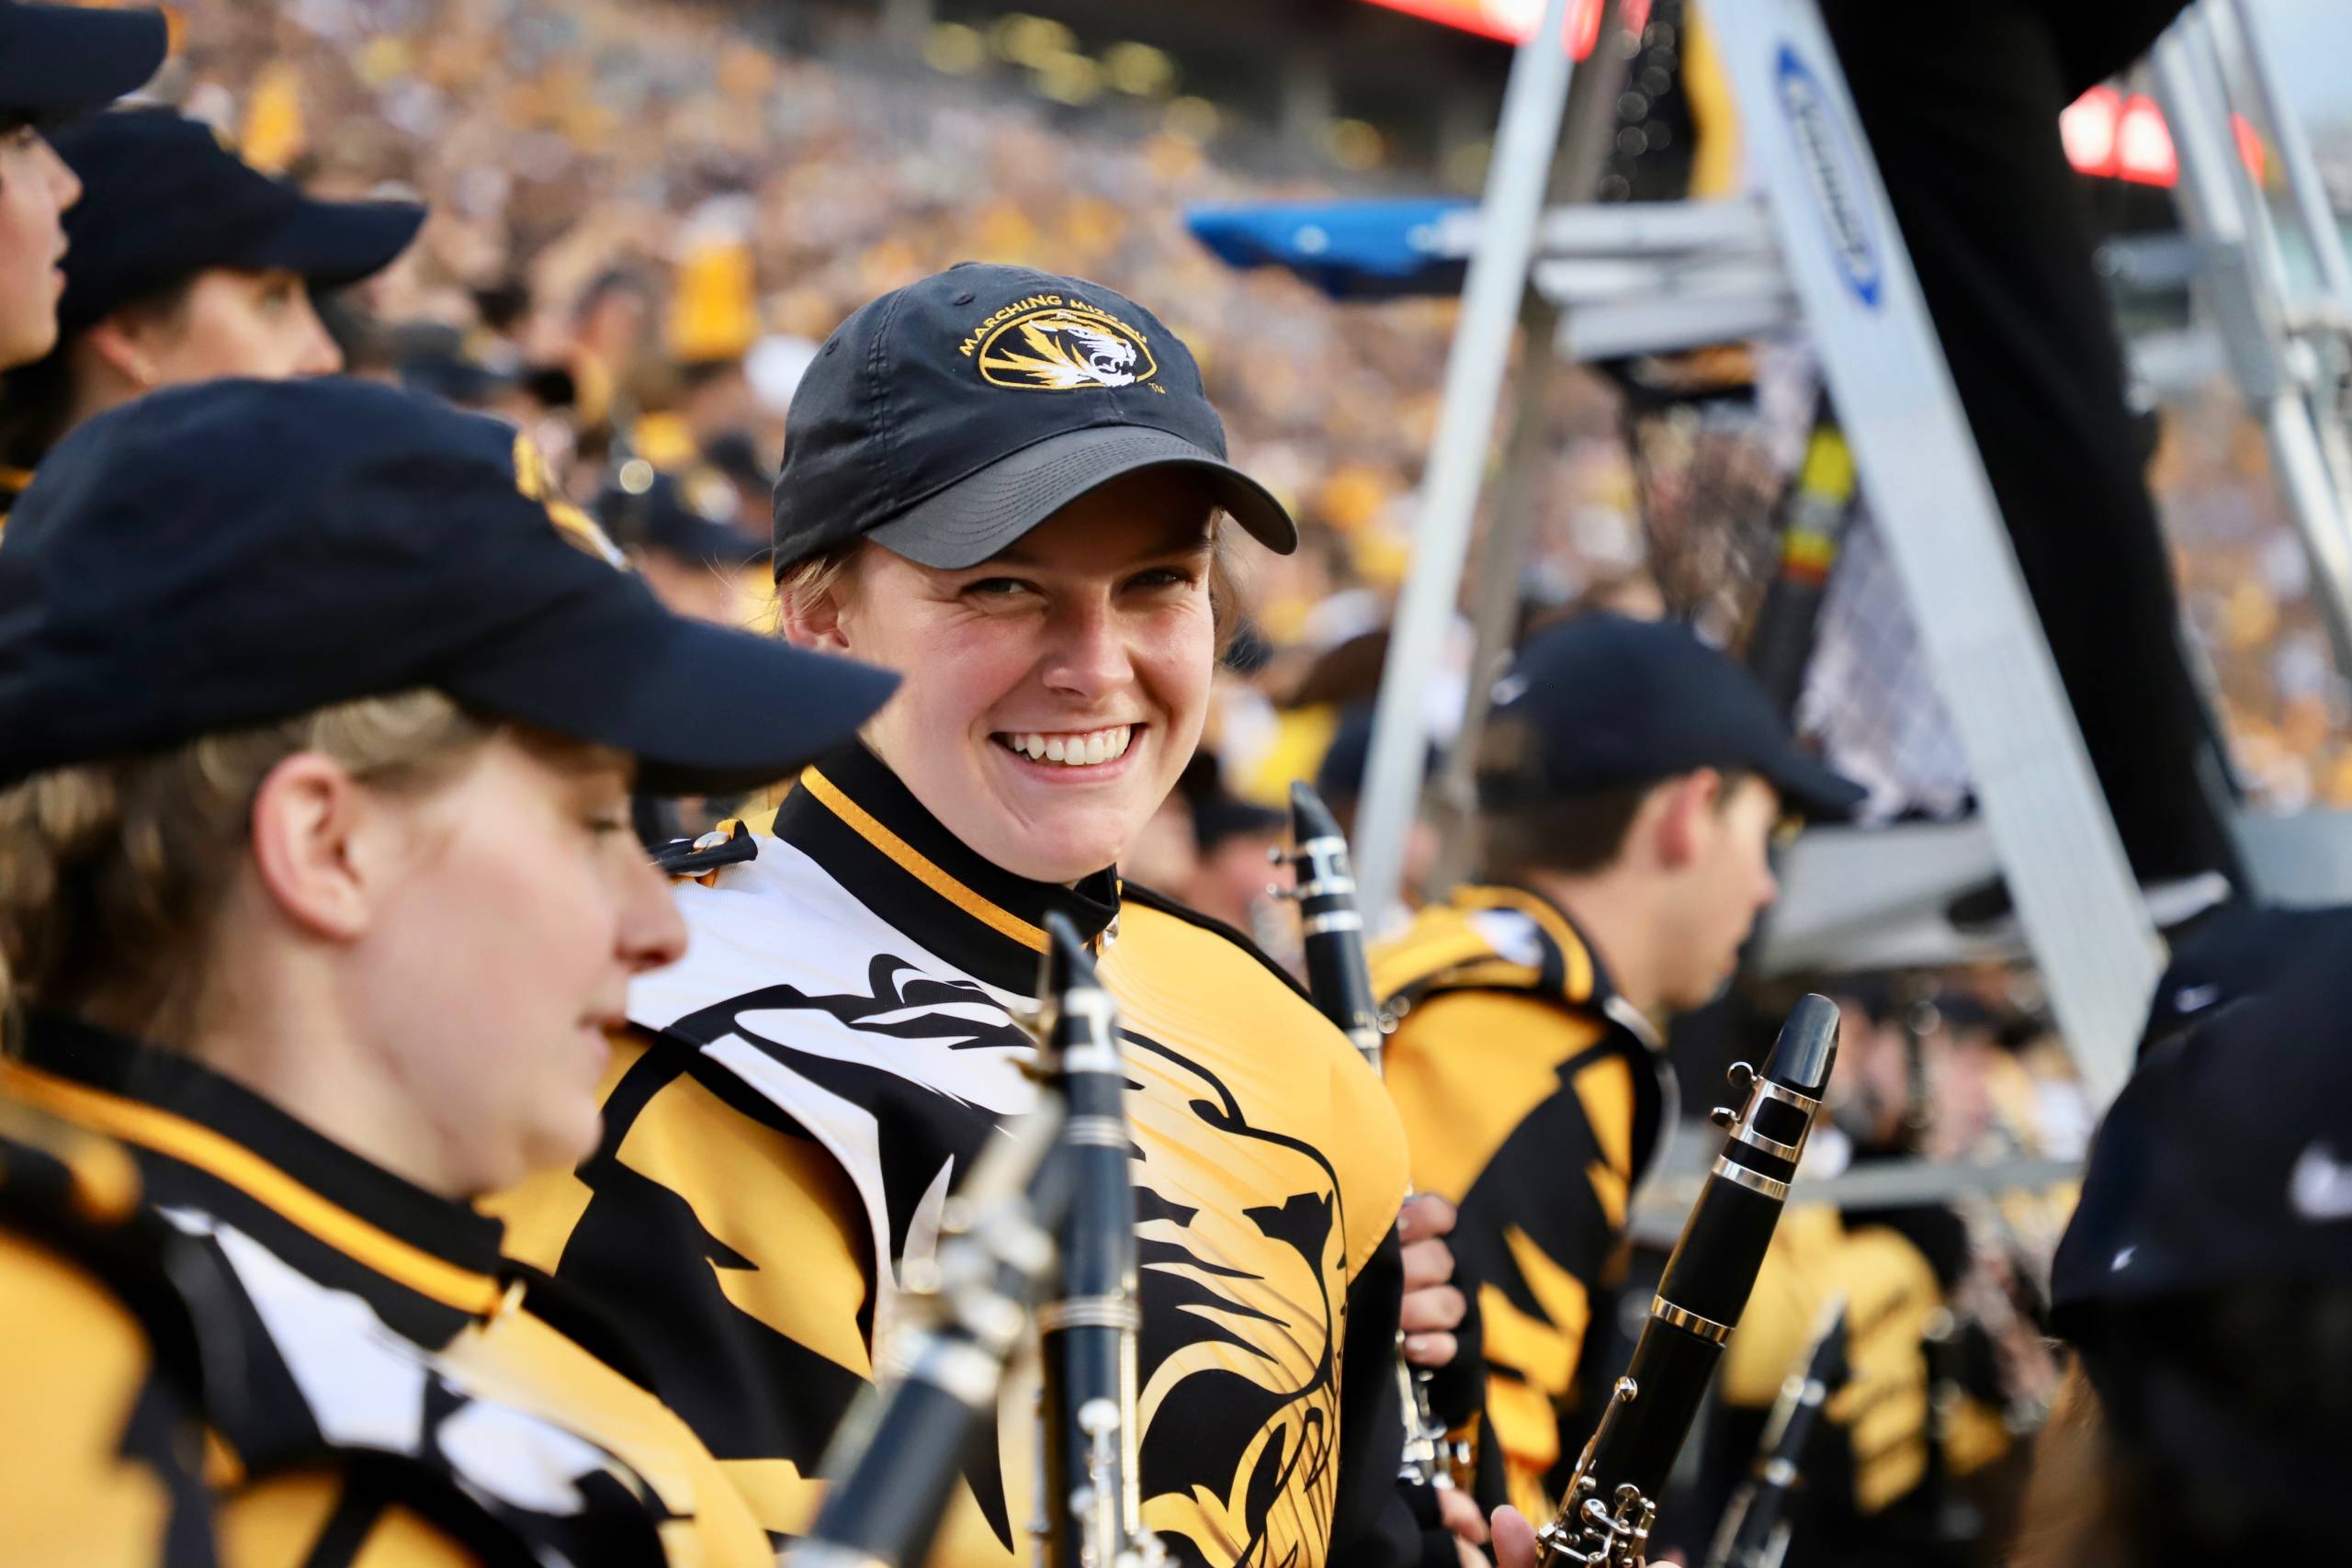 Kesley Kobielusz, a senior environmental sciences major, is in her fourth year as a member of Marching Mizzou. She has played the clarinet throughout her time in the band. Photo courtesy of Marching Mizzou.